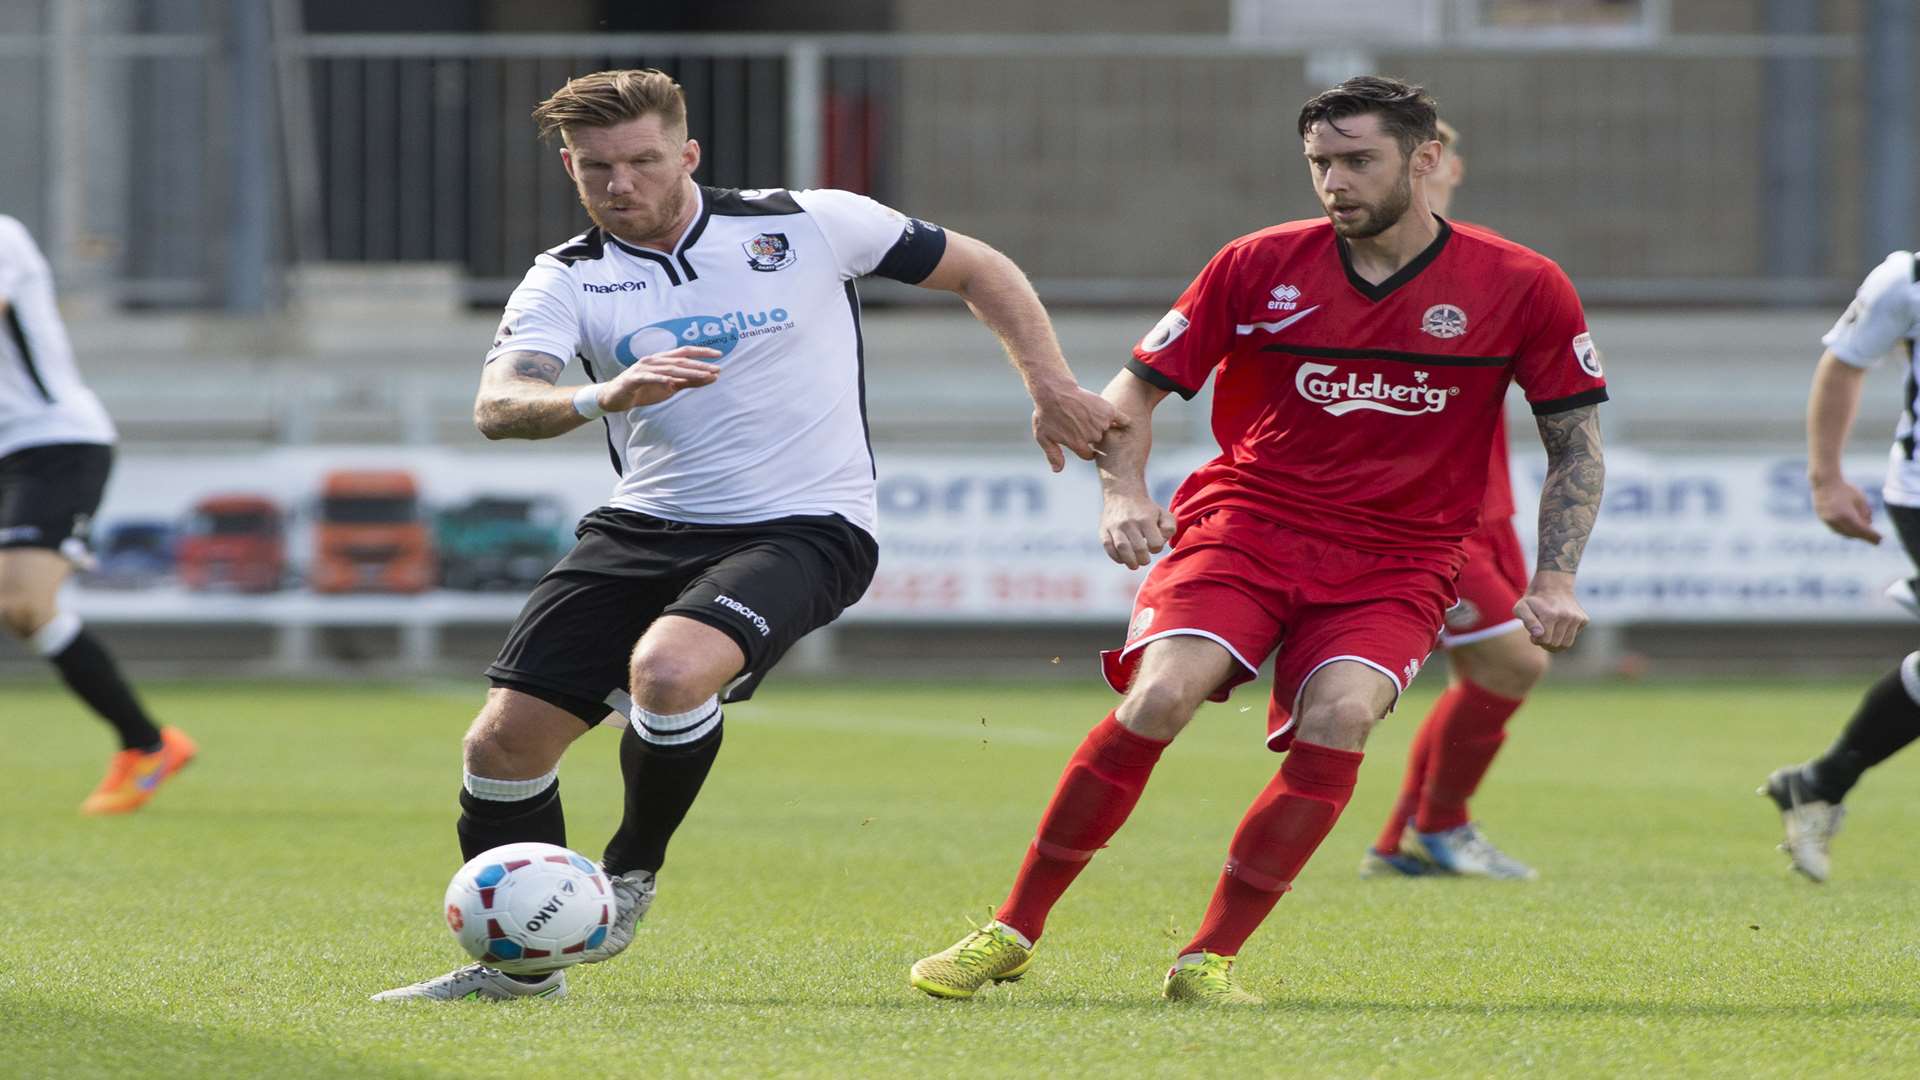 Elliot Bradbrook is now in his seventh season at Dartford Picture: Andy Payton